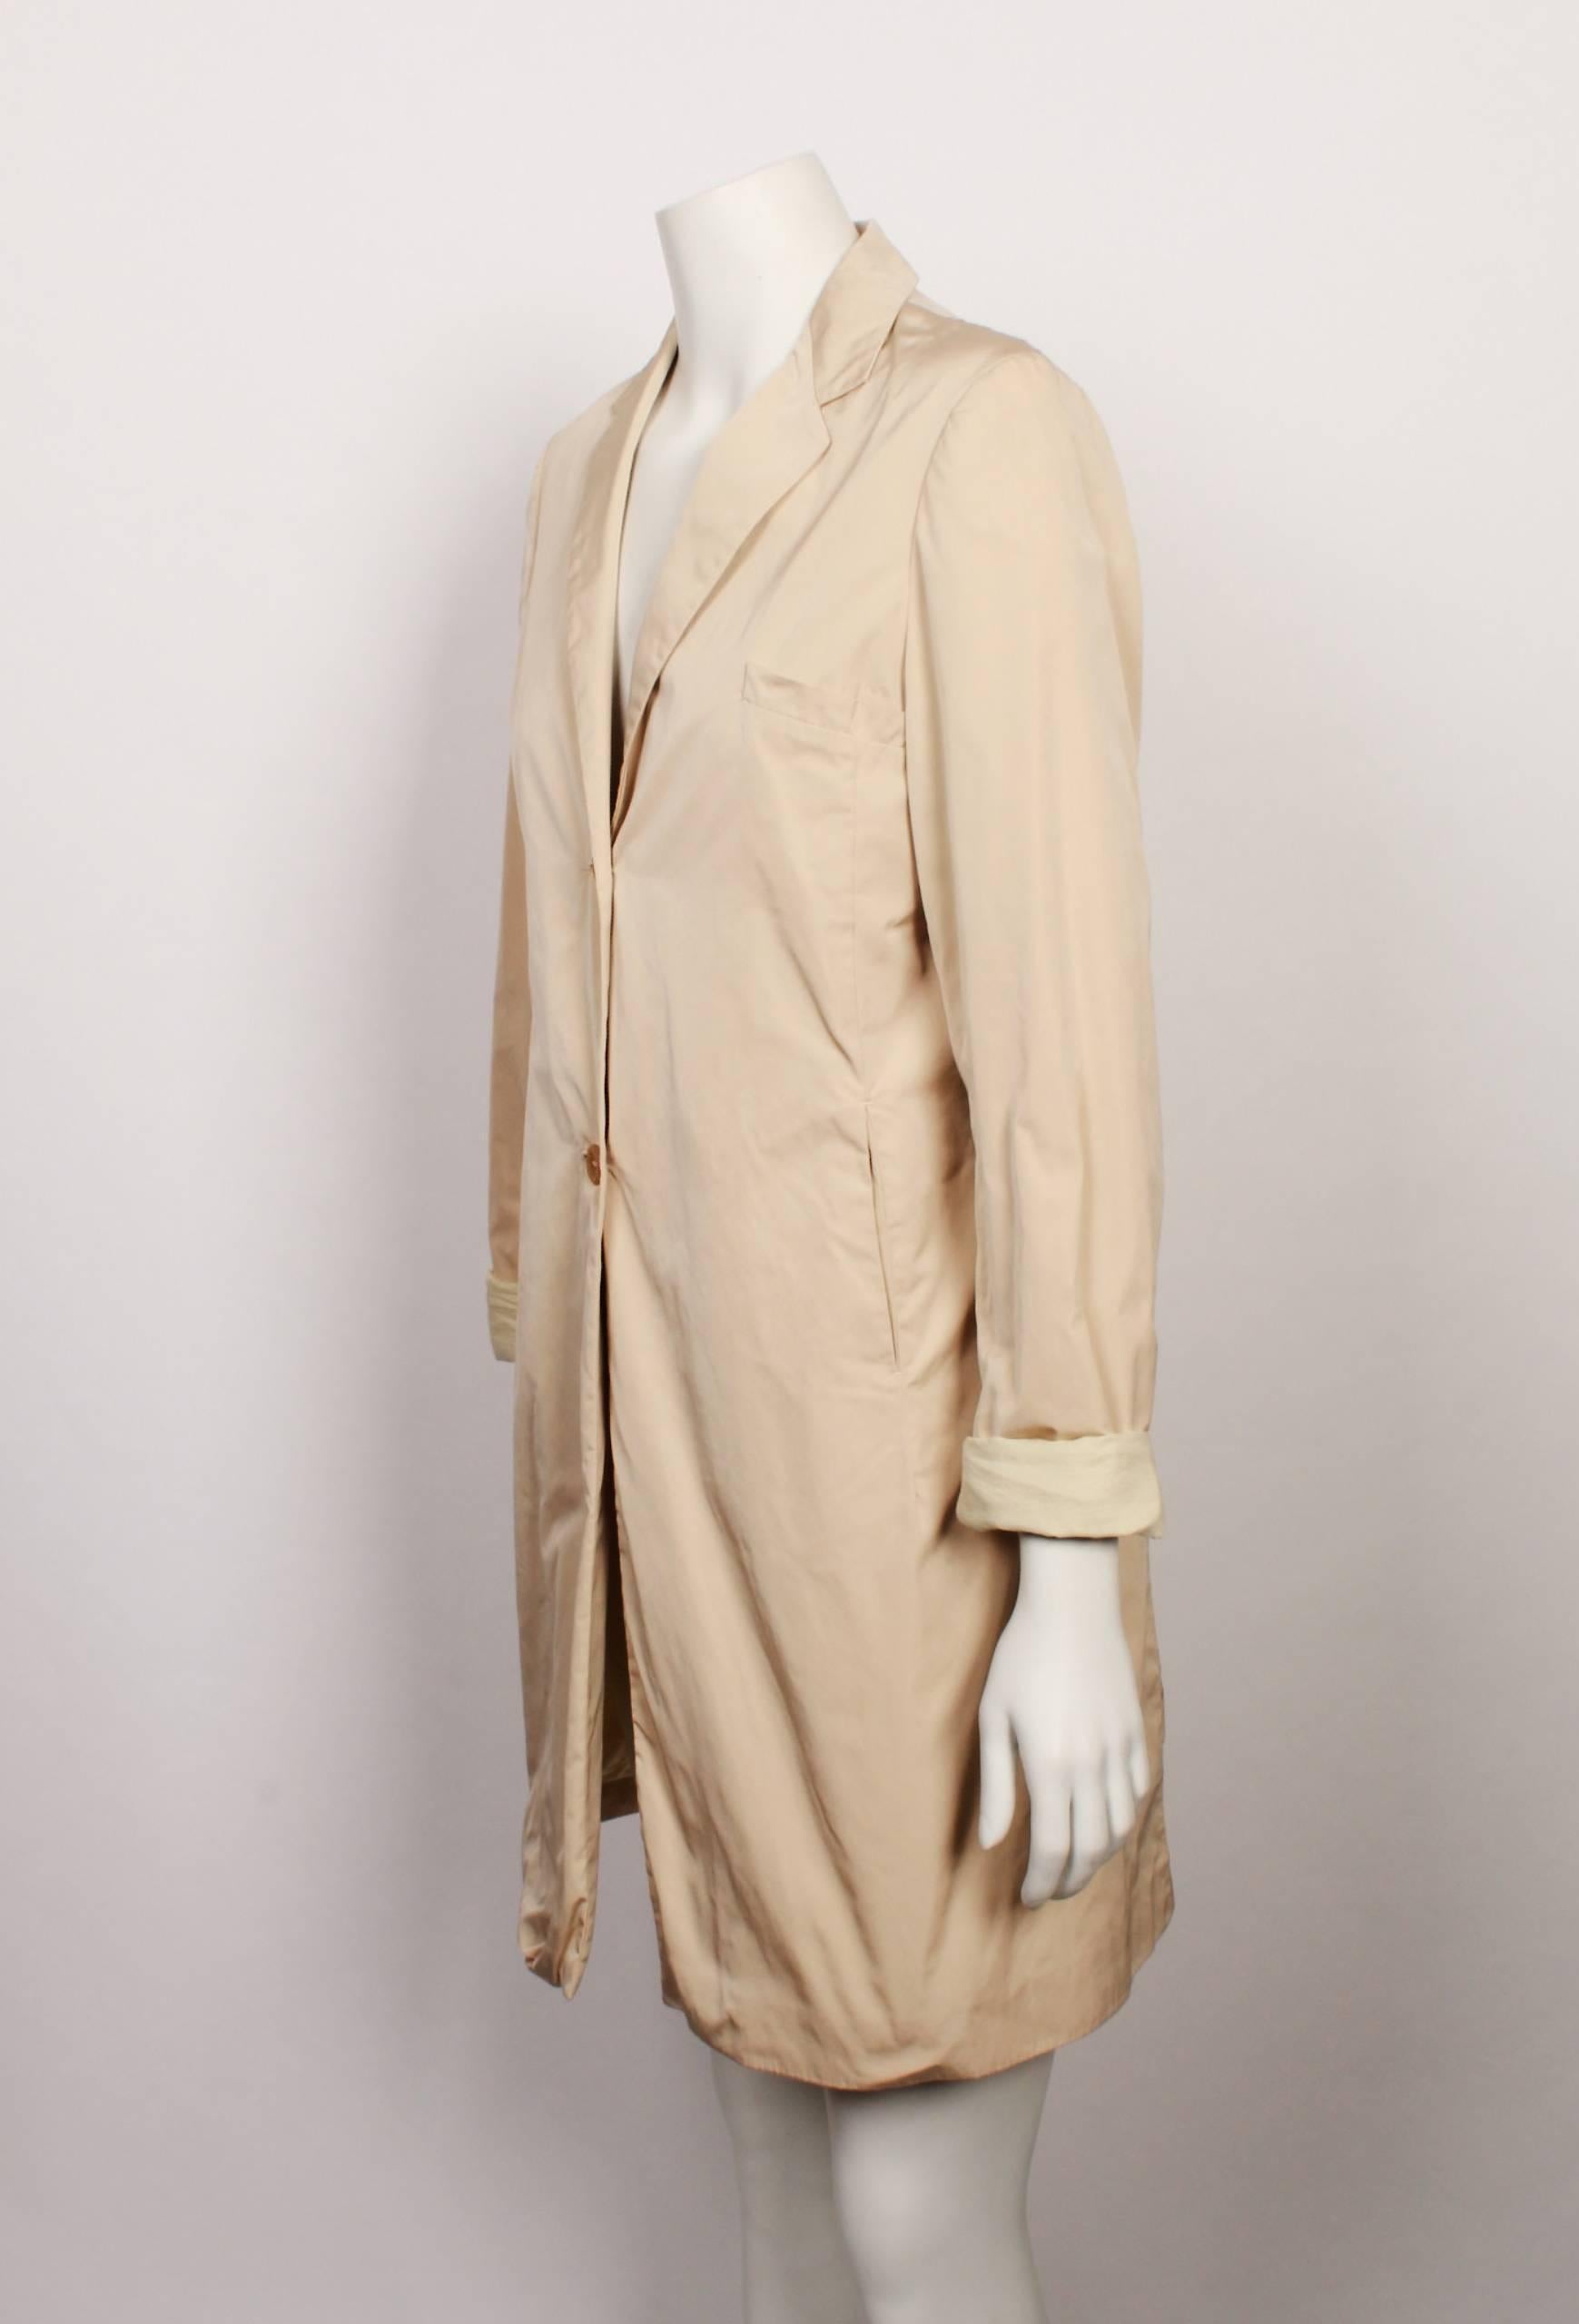 From the house of minimalist German designer Jil Sander. Light-weighted and made in Italy this coat is indicative of the designer's ethos of clean shapes and simple design. 